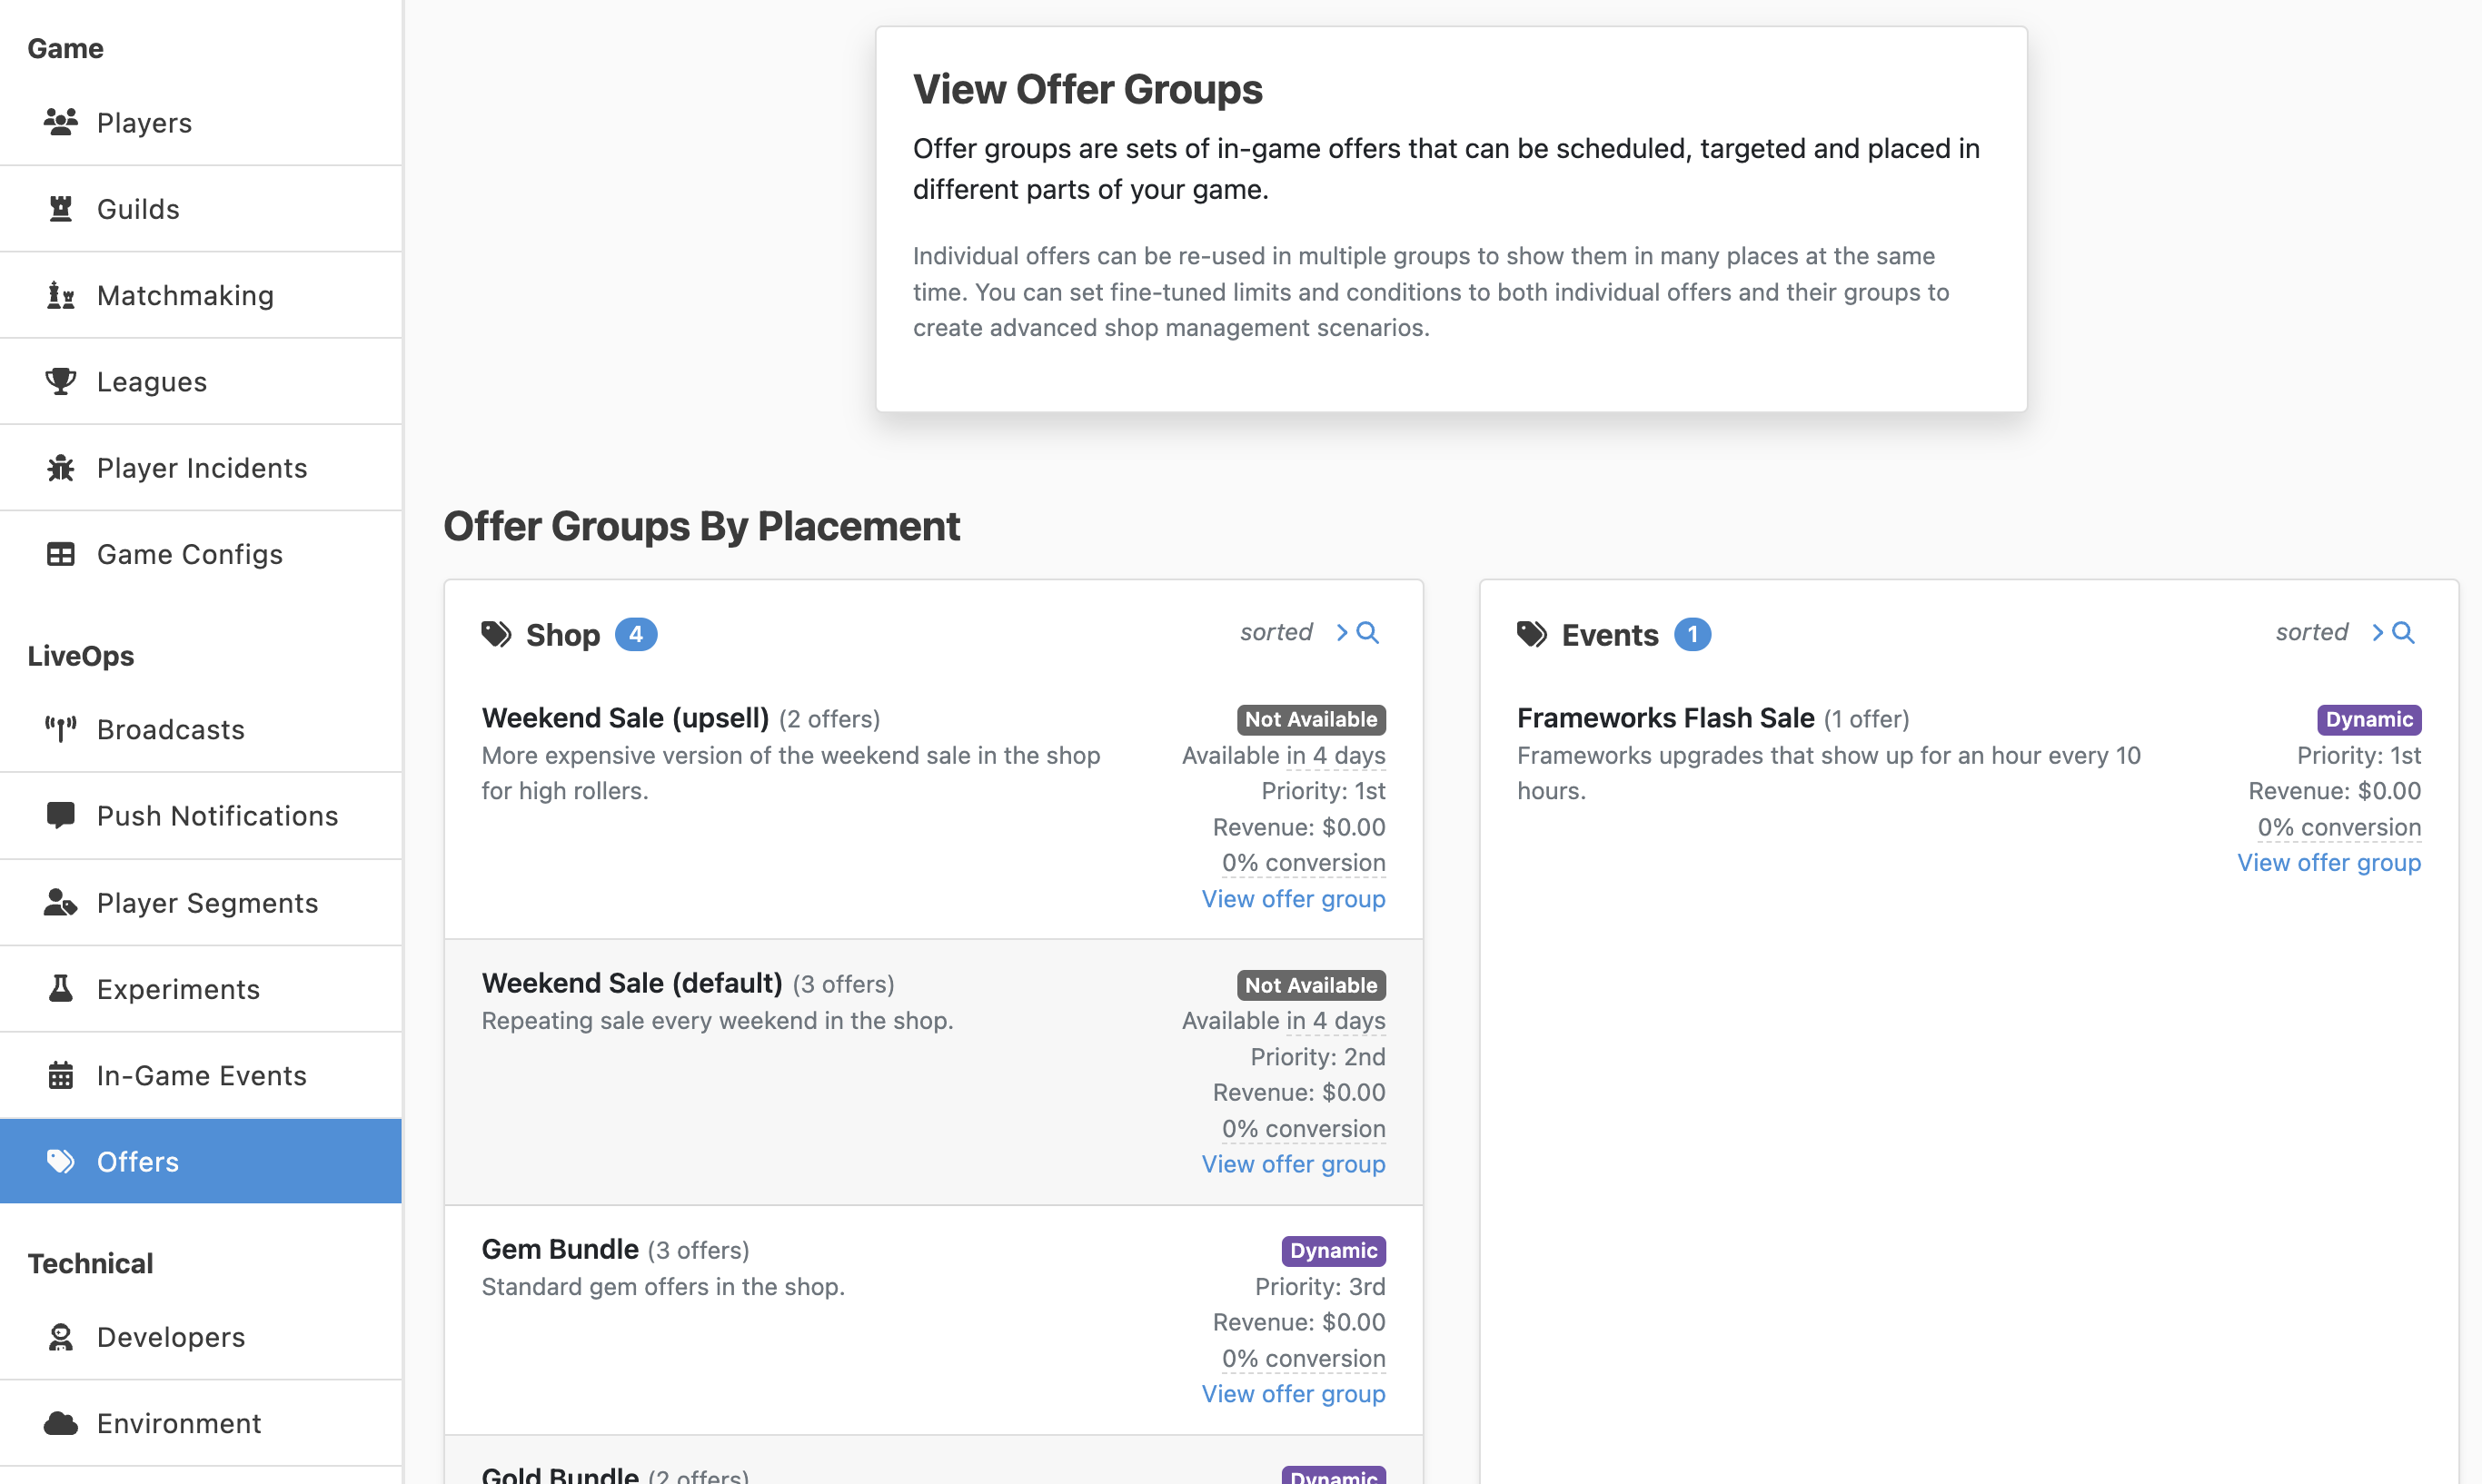 The by-placement organization will be useful once you've configured more Offer Groups.